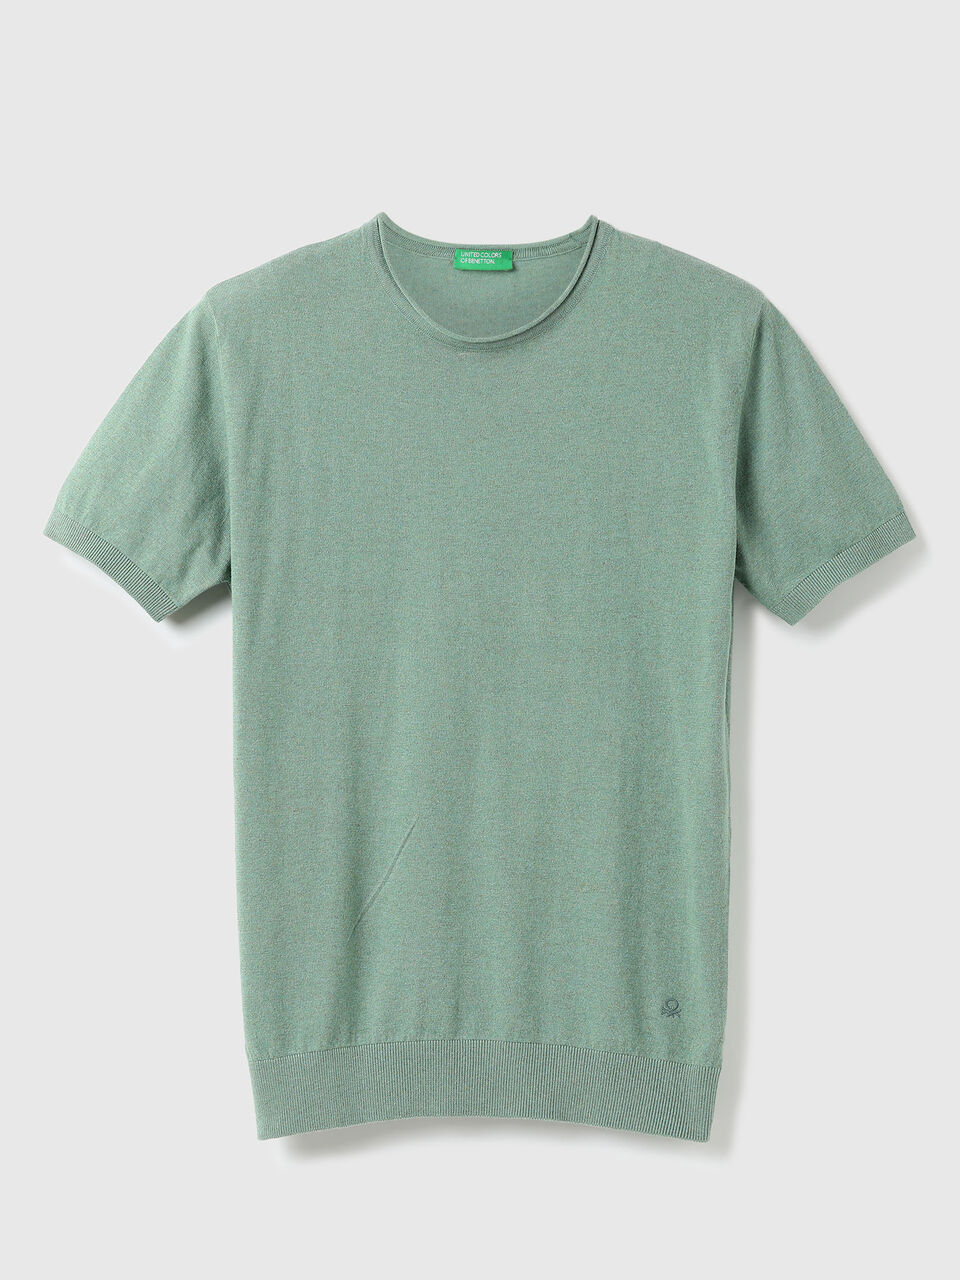 Sleepynuts Round Neck Plain Cotton T-Shirt for Men Pack of 4 (Army, Mint  Green, Sky Blue, Navy Milli,S) : : Fashion